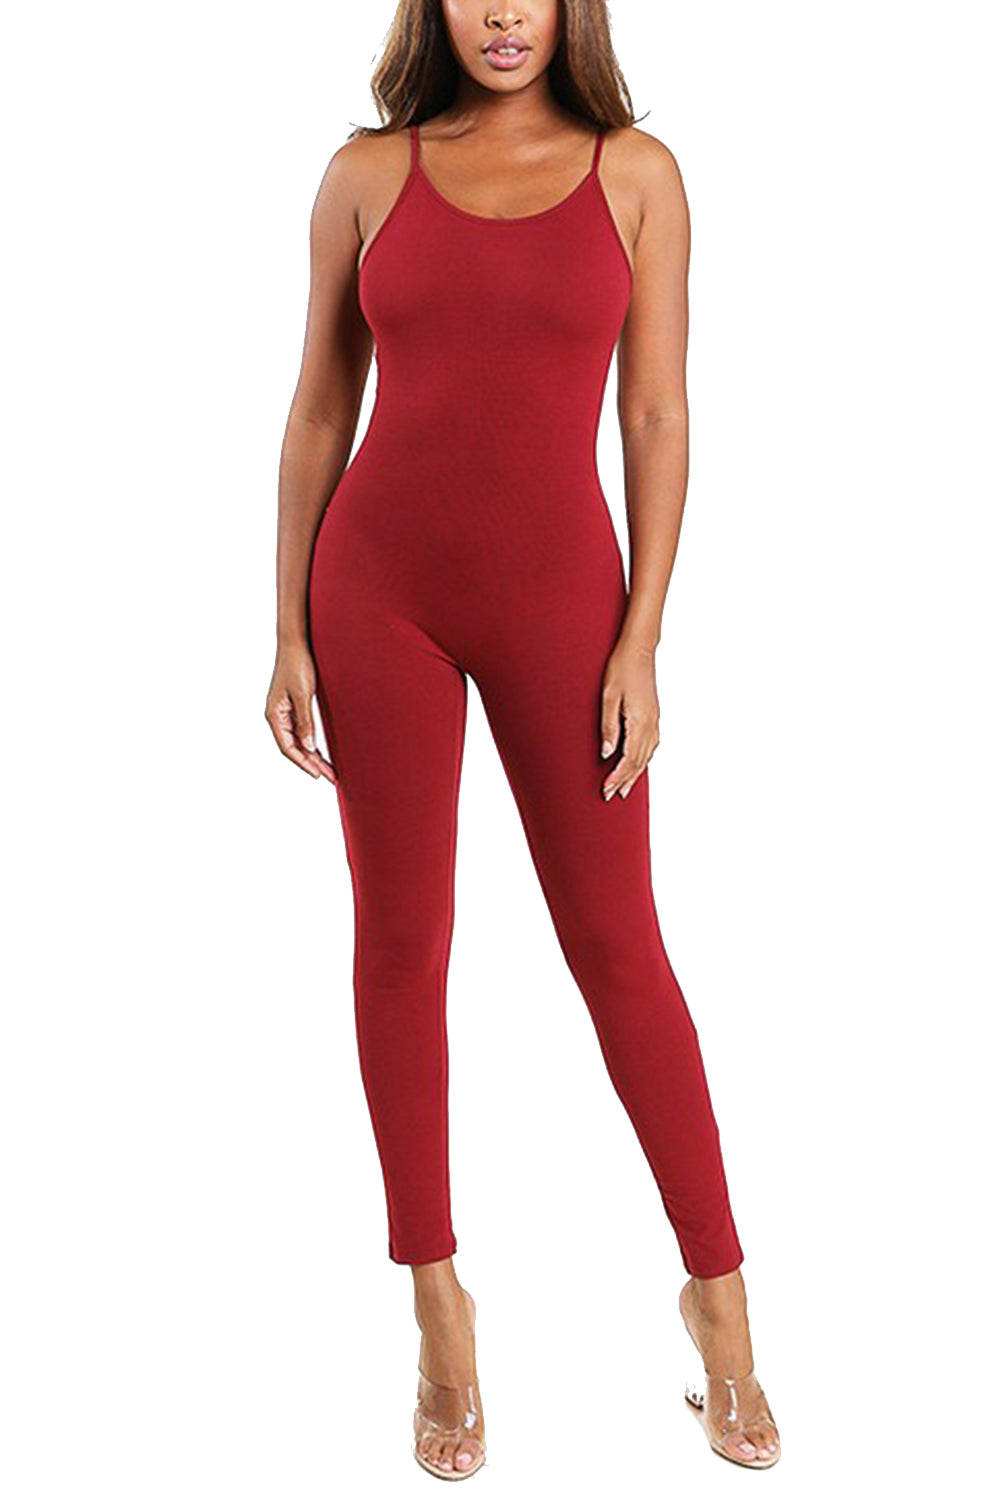 Womens Ladies Juniors Sexy Skin Tight Bodycon Strappy Catsuit